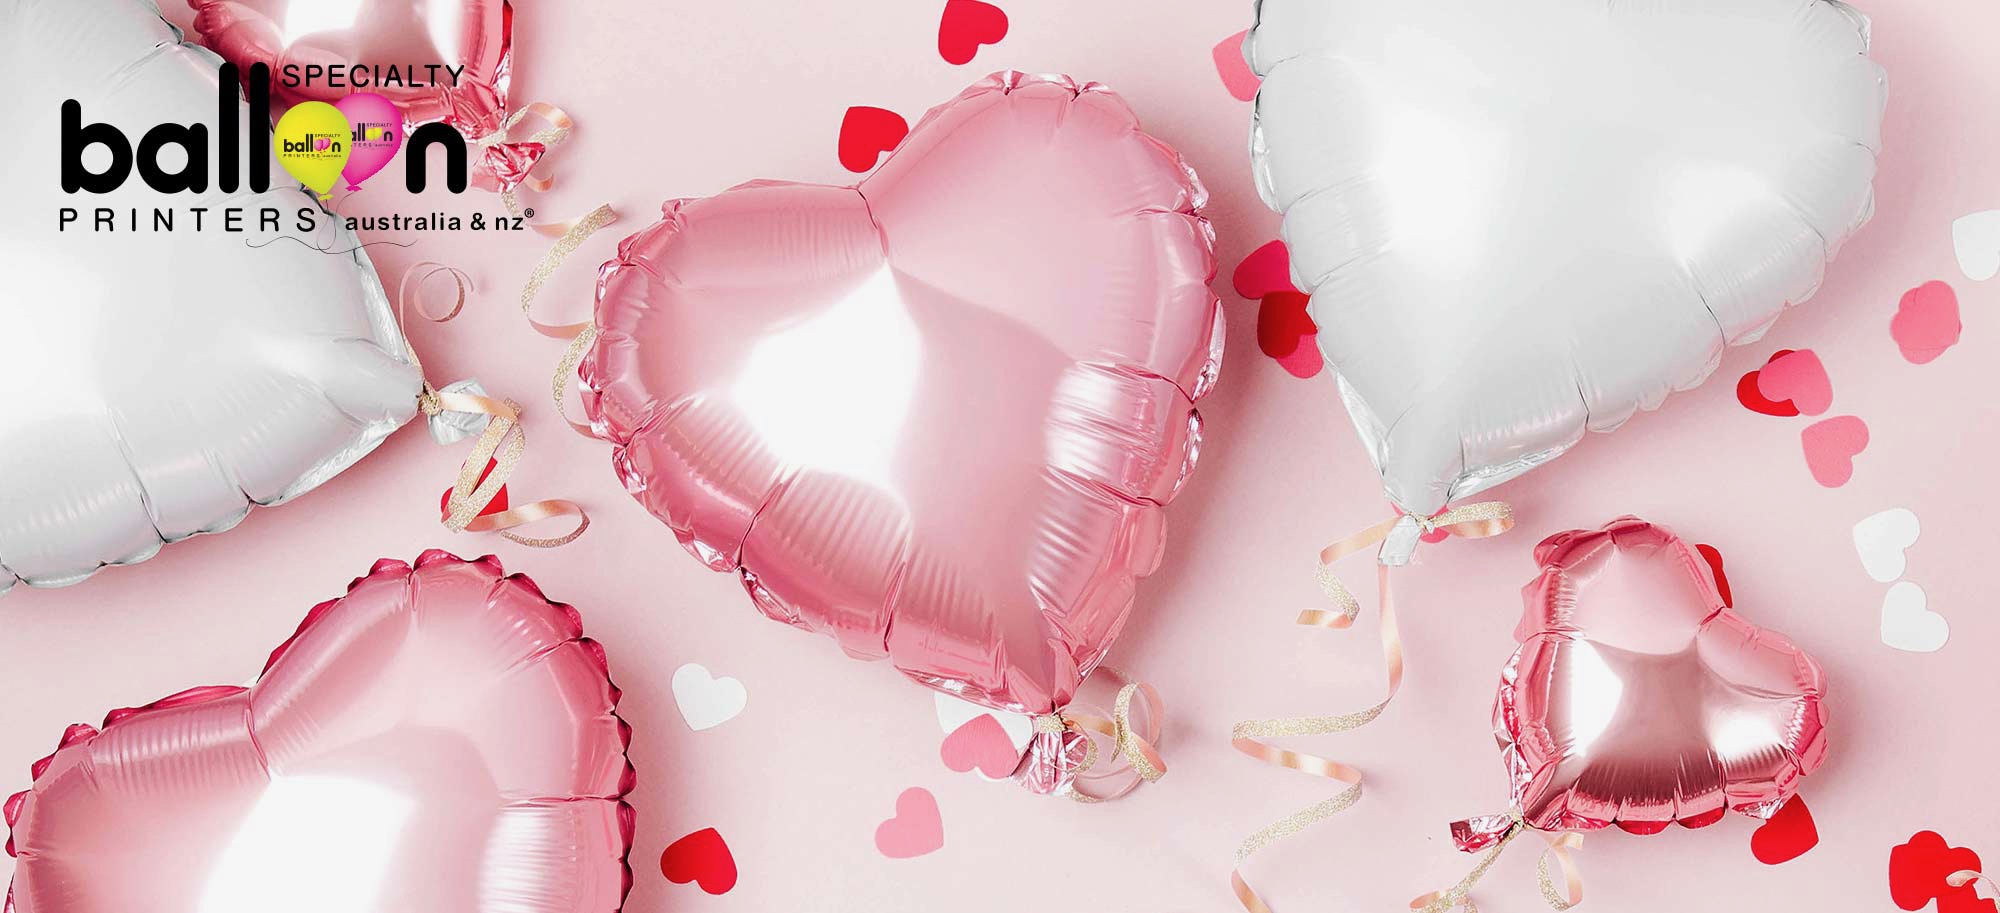 Specialty Balloon Printers Valentines Day Gift Guide For All The Special People In Your Life